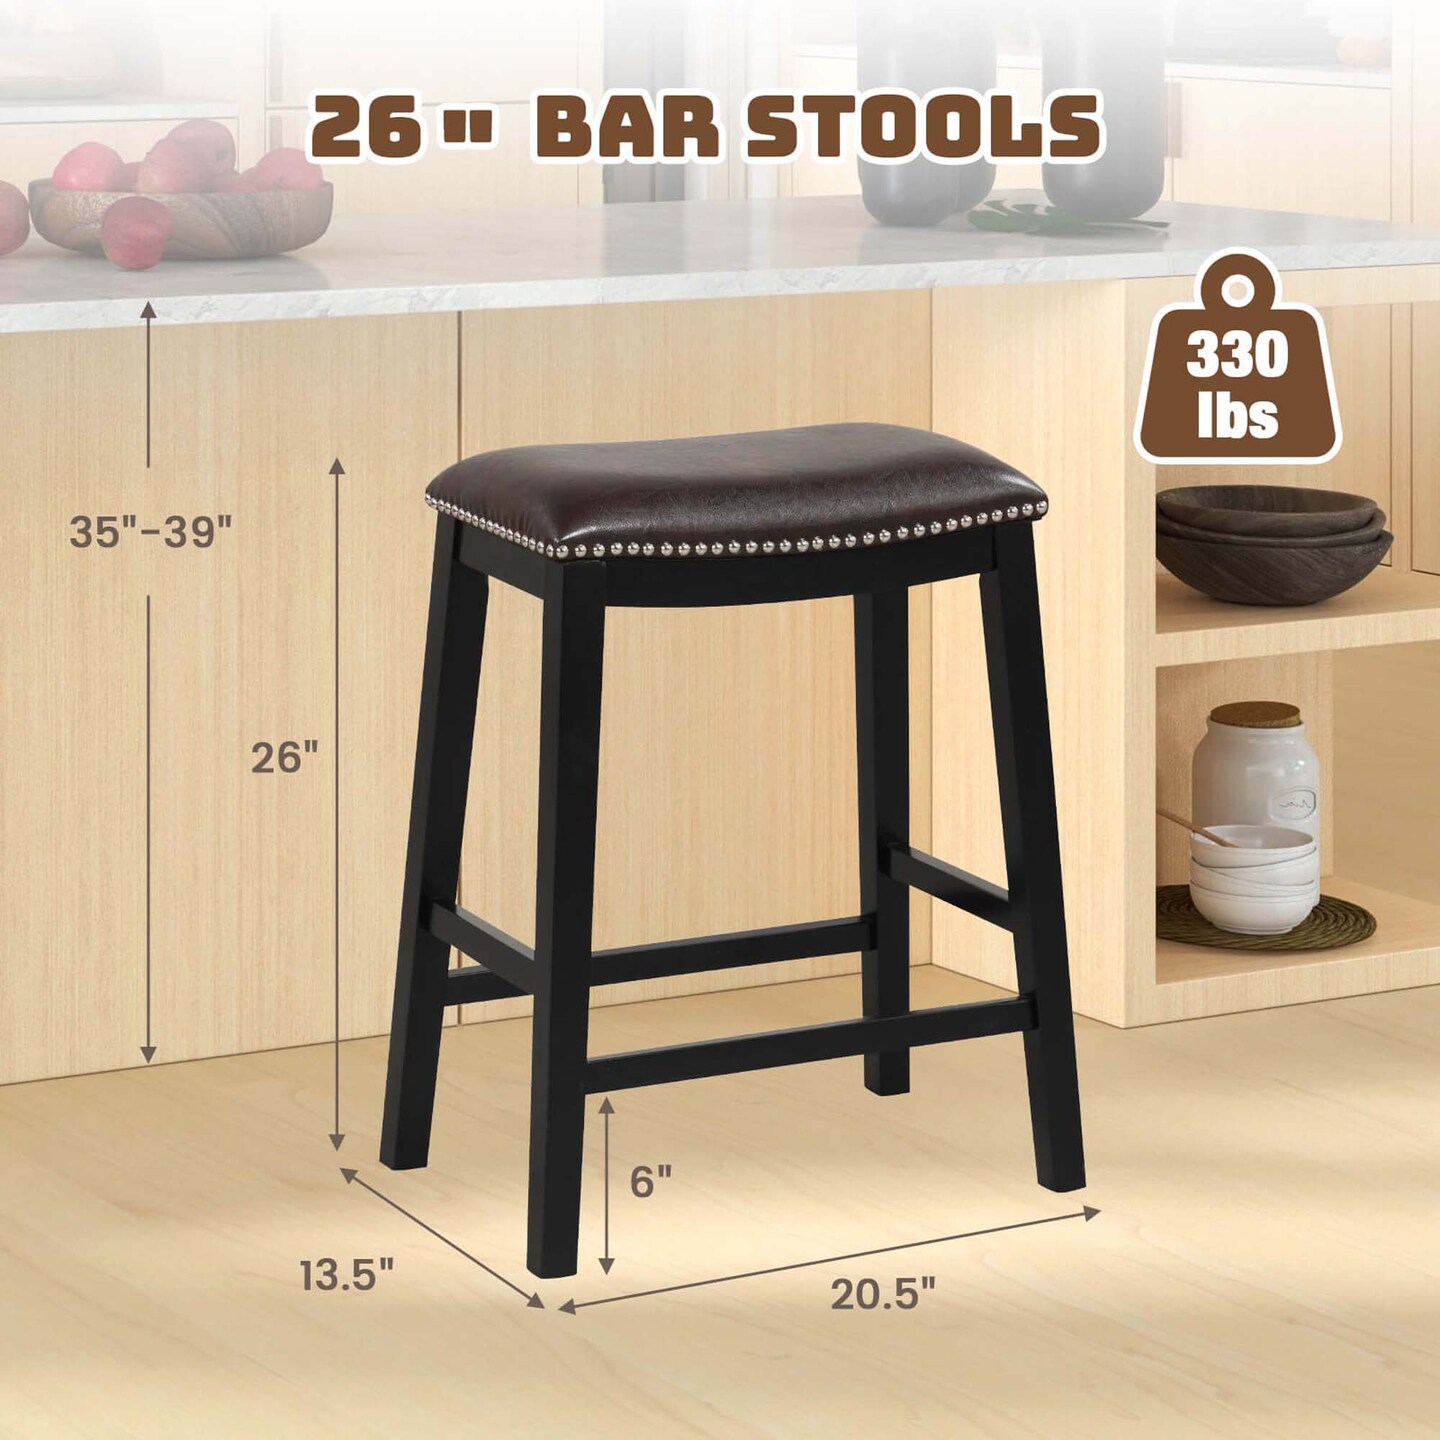 Costway 26-Inch Bar Stool Set of 2 Counter Height Saddle Stools with Upholstered Seat Brown/Black/Gray